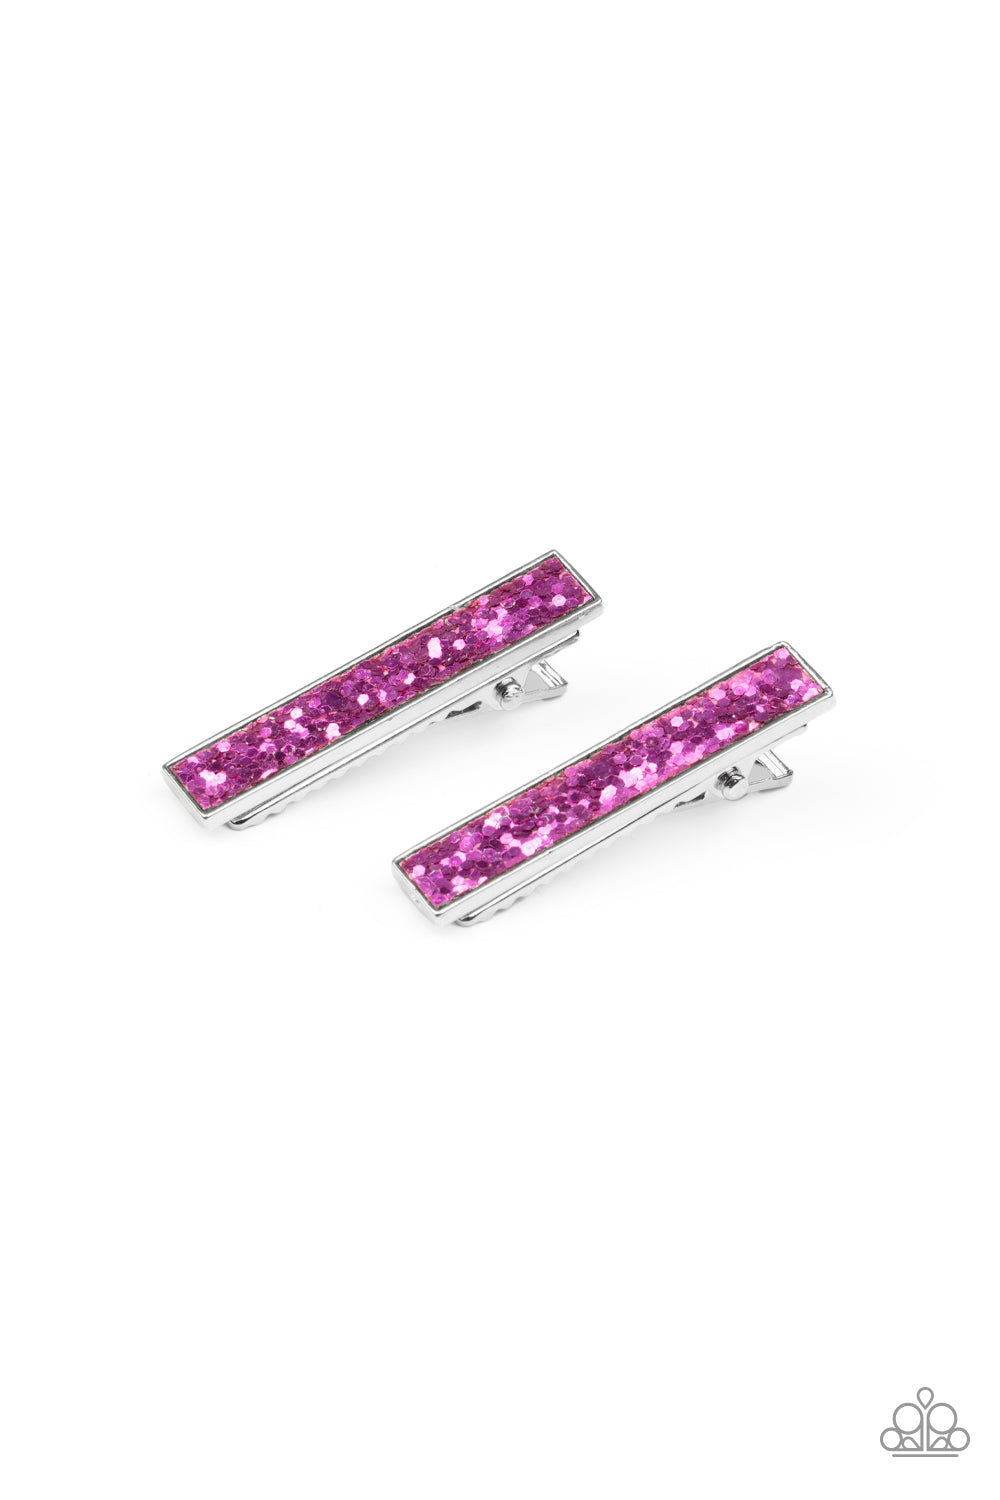 For All The World To SEQUIN - Pink Glittery Sequin Paparazzi Set of 2 Hair Clips